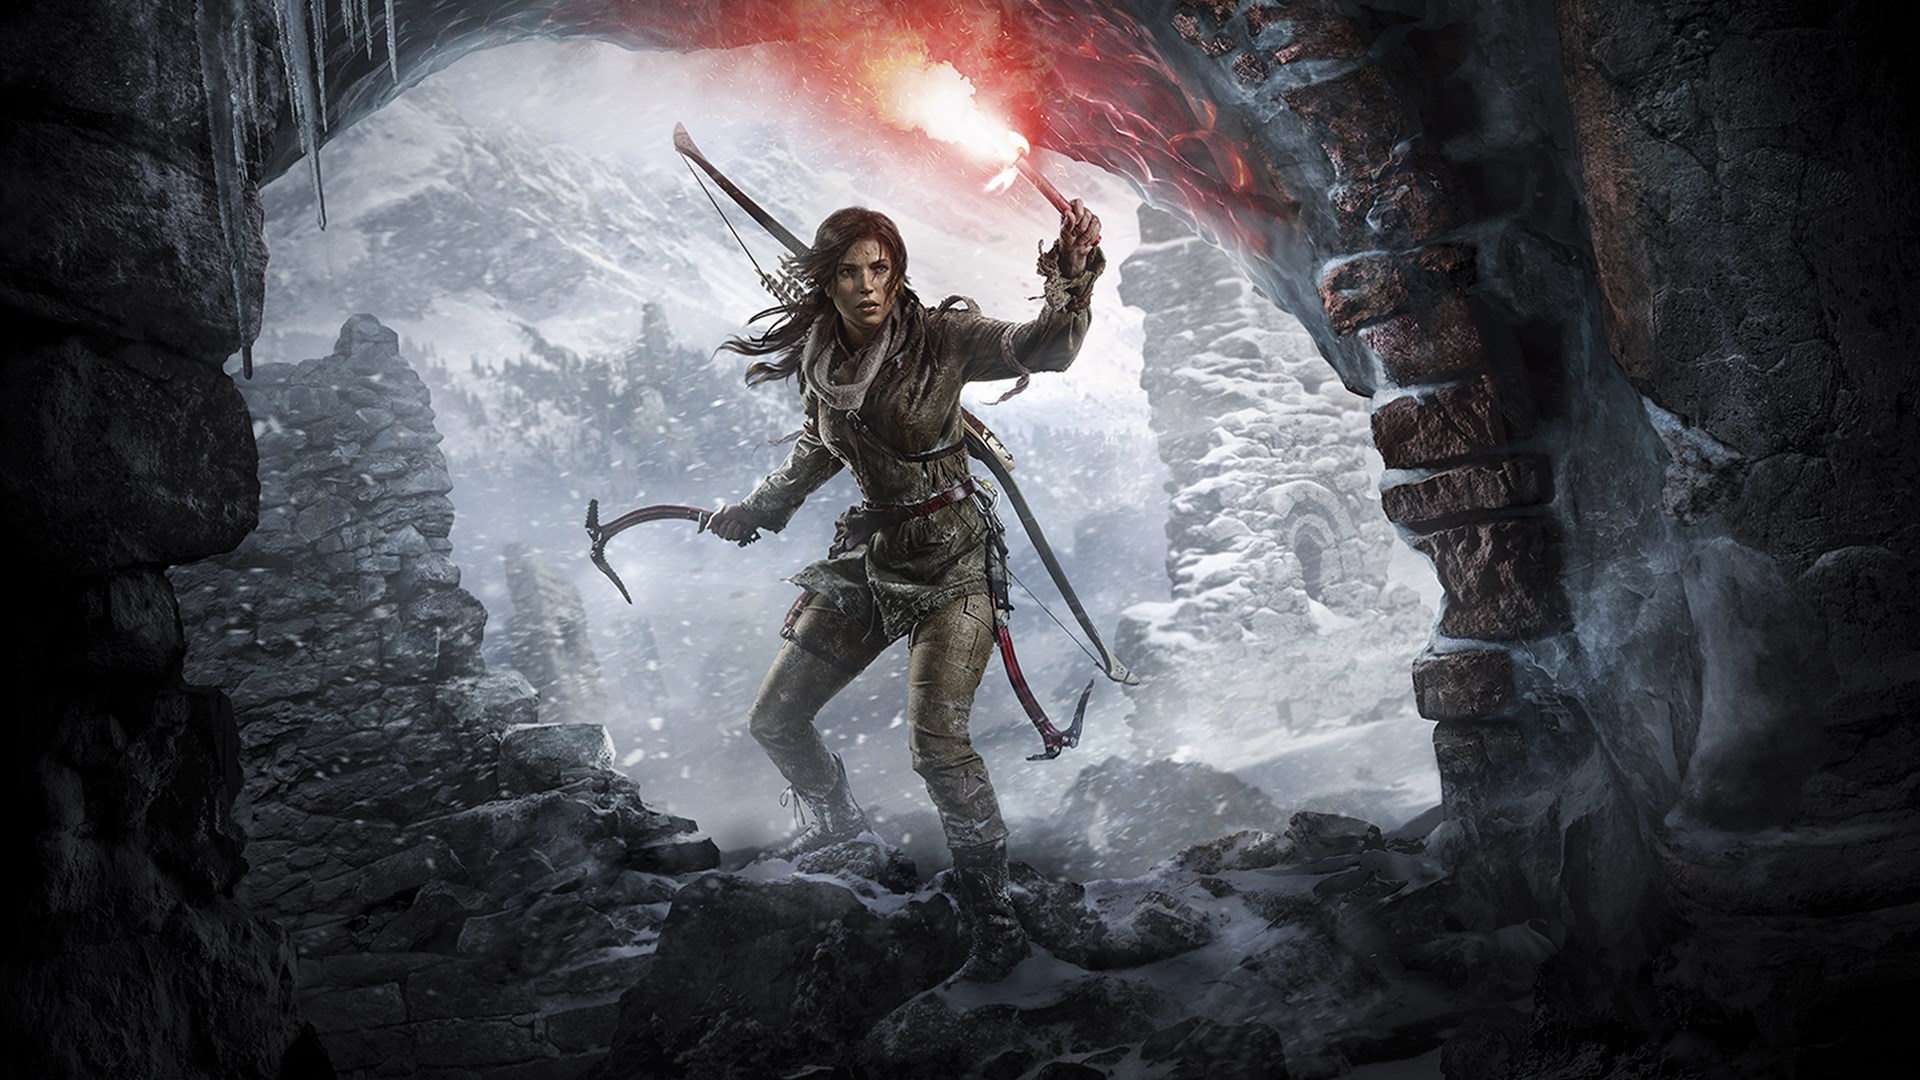 Rise of the Tomb Raider: 20 Year Celebration | Download and Buy Today -  Epic Games Store